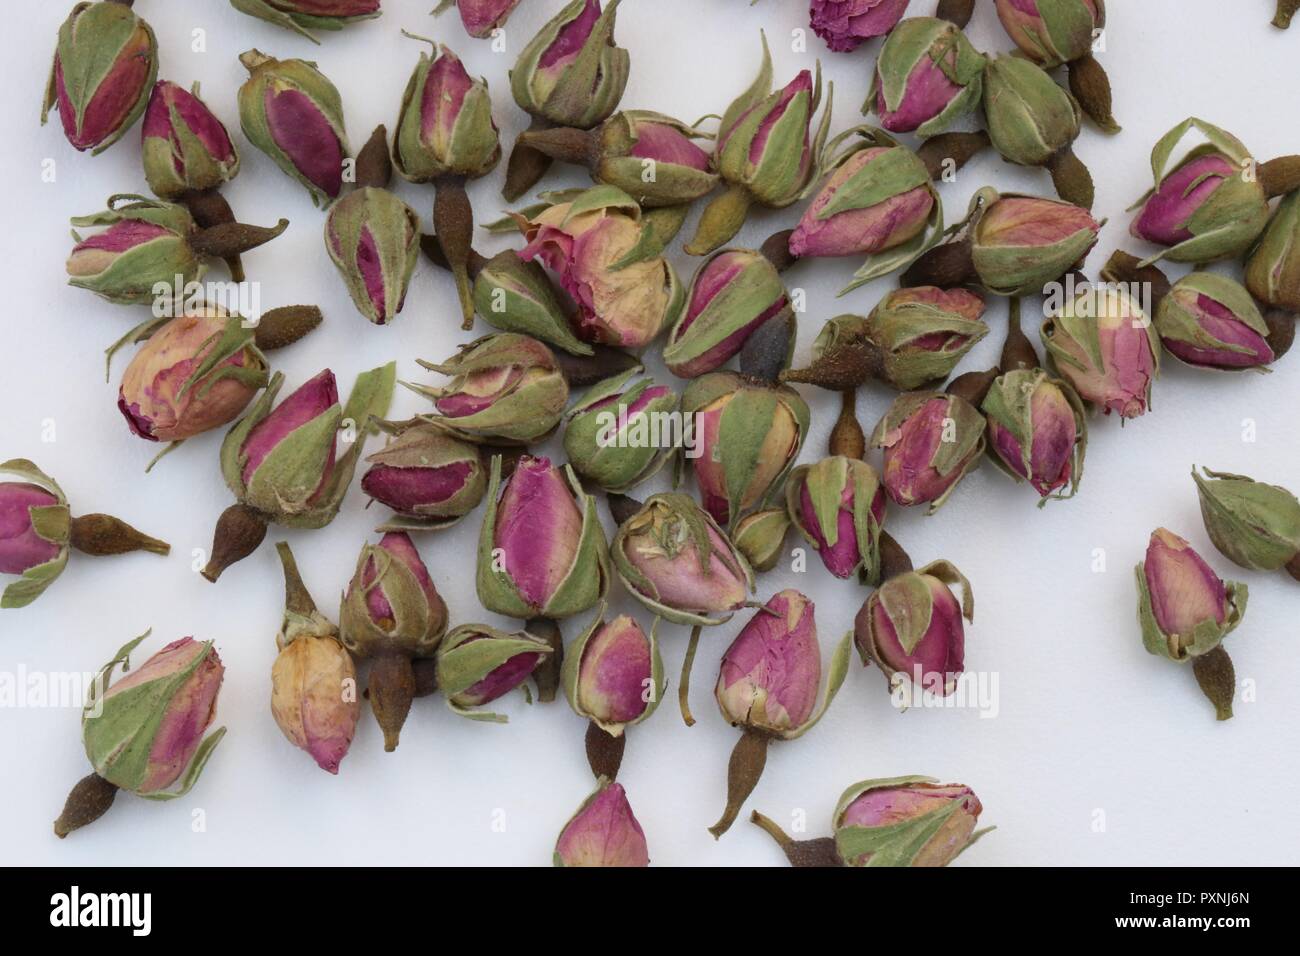 Dry Roses for Tea. Stack of dry roses for homemade scented and flavored tea. Stock Photo